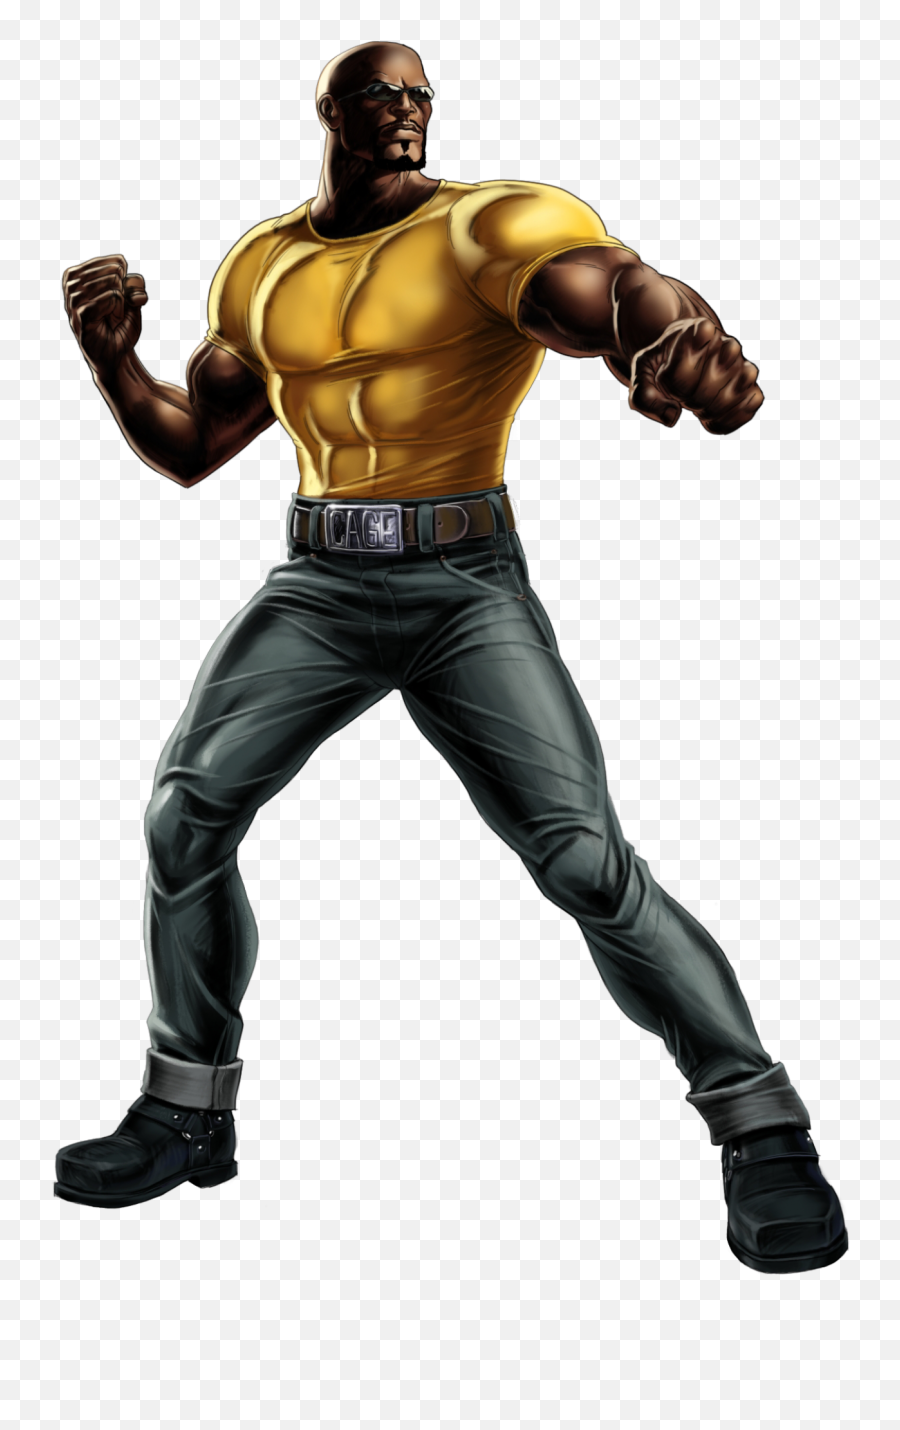 Cage - Luke Cage Marvel Png Full Size Png Download Seekpng Marvel Luke Cage Emoji,Cage Png